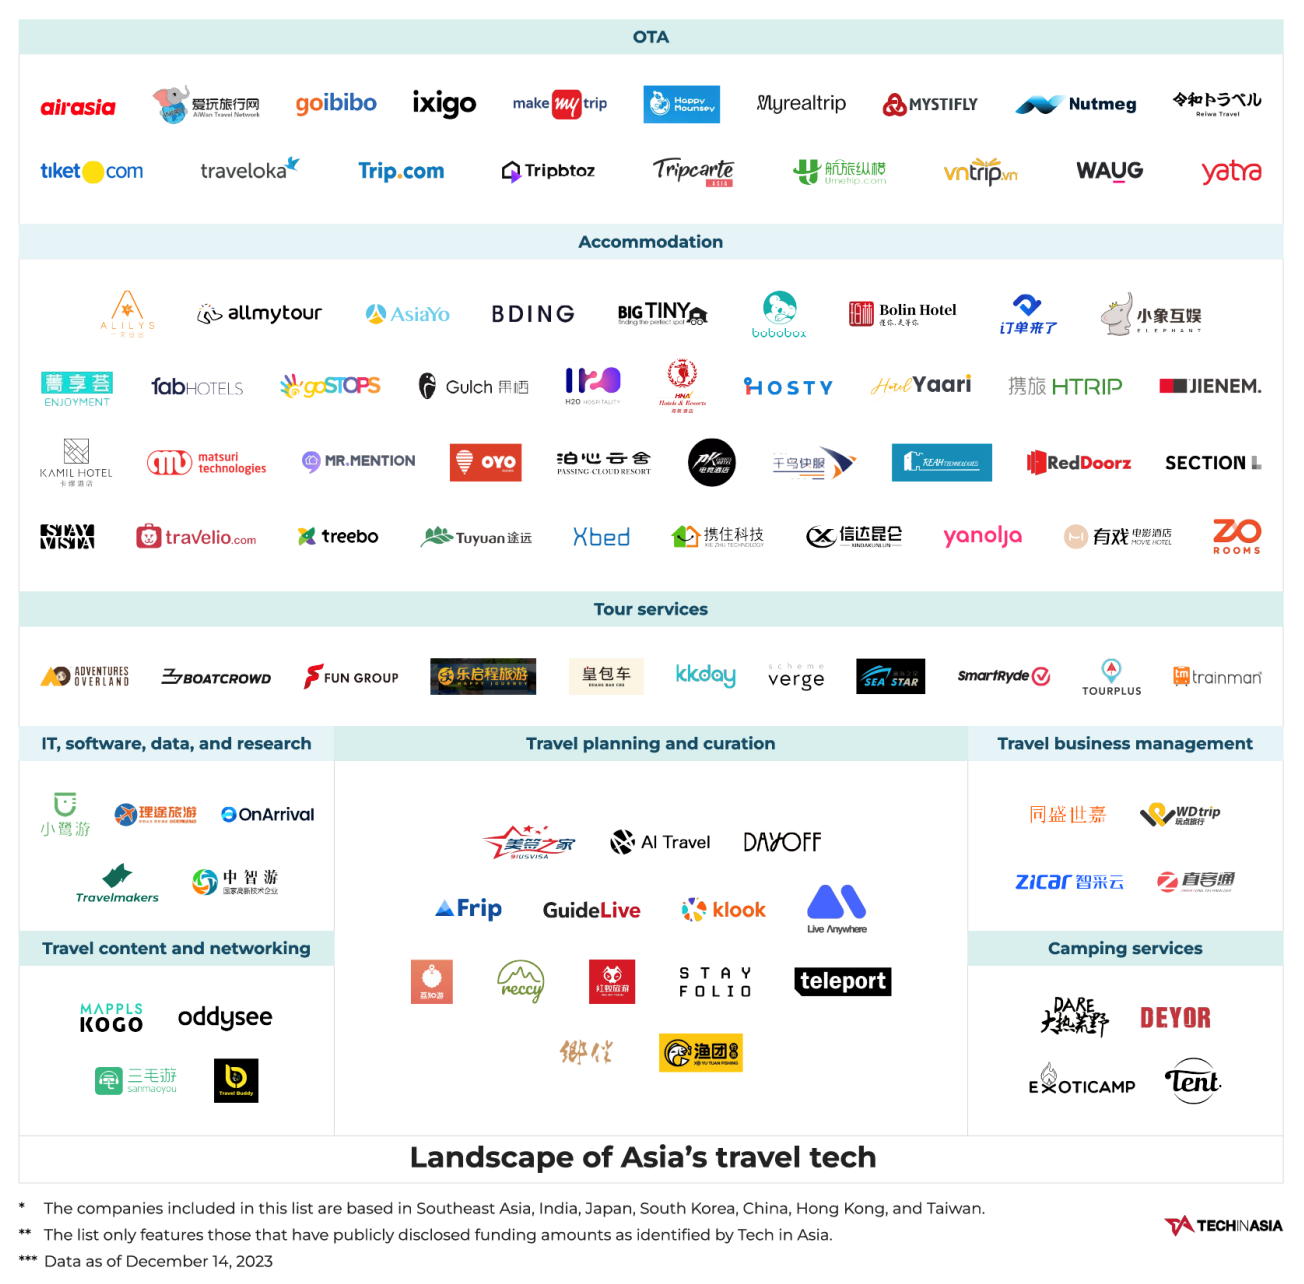 landscape-of-asias-travel-tech-sector-source-tech-in-asia-dec-2023.png